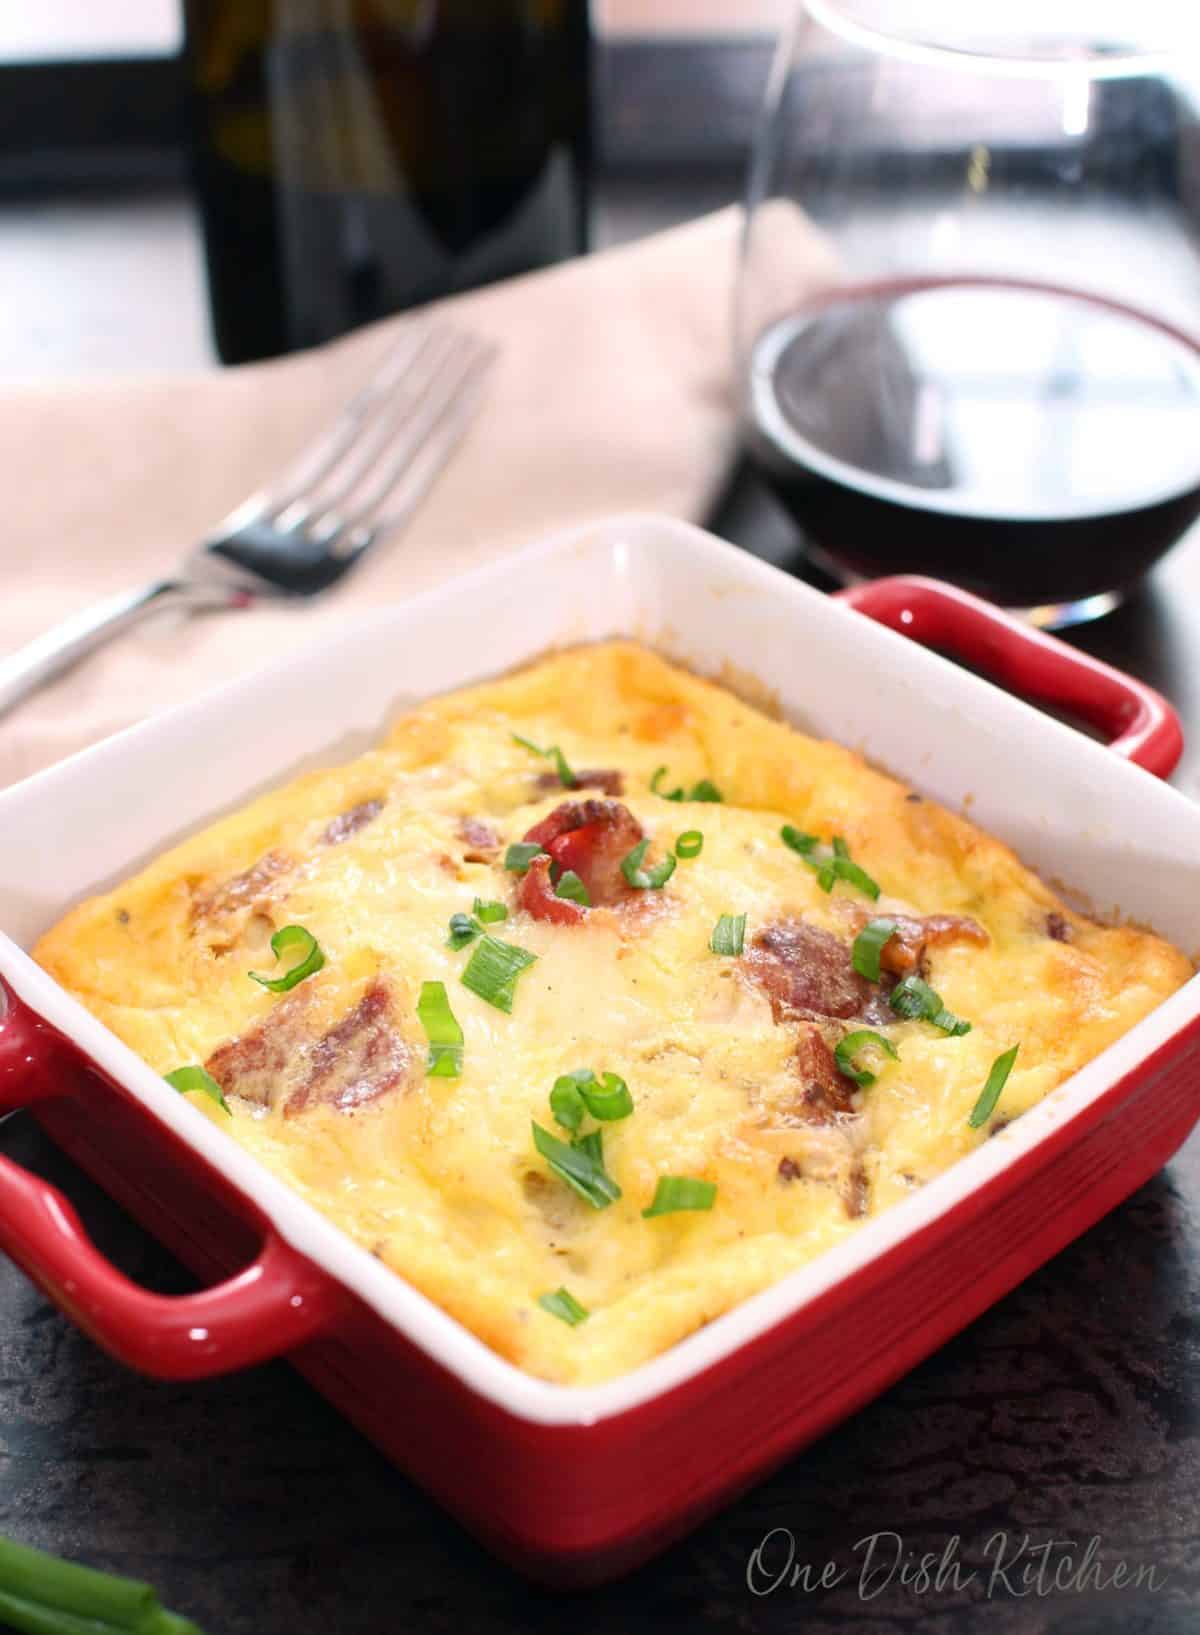 Crustless quiche lorraine baked in a small baking dish on a tray with a glass of red wine.